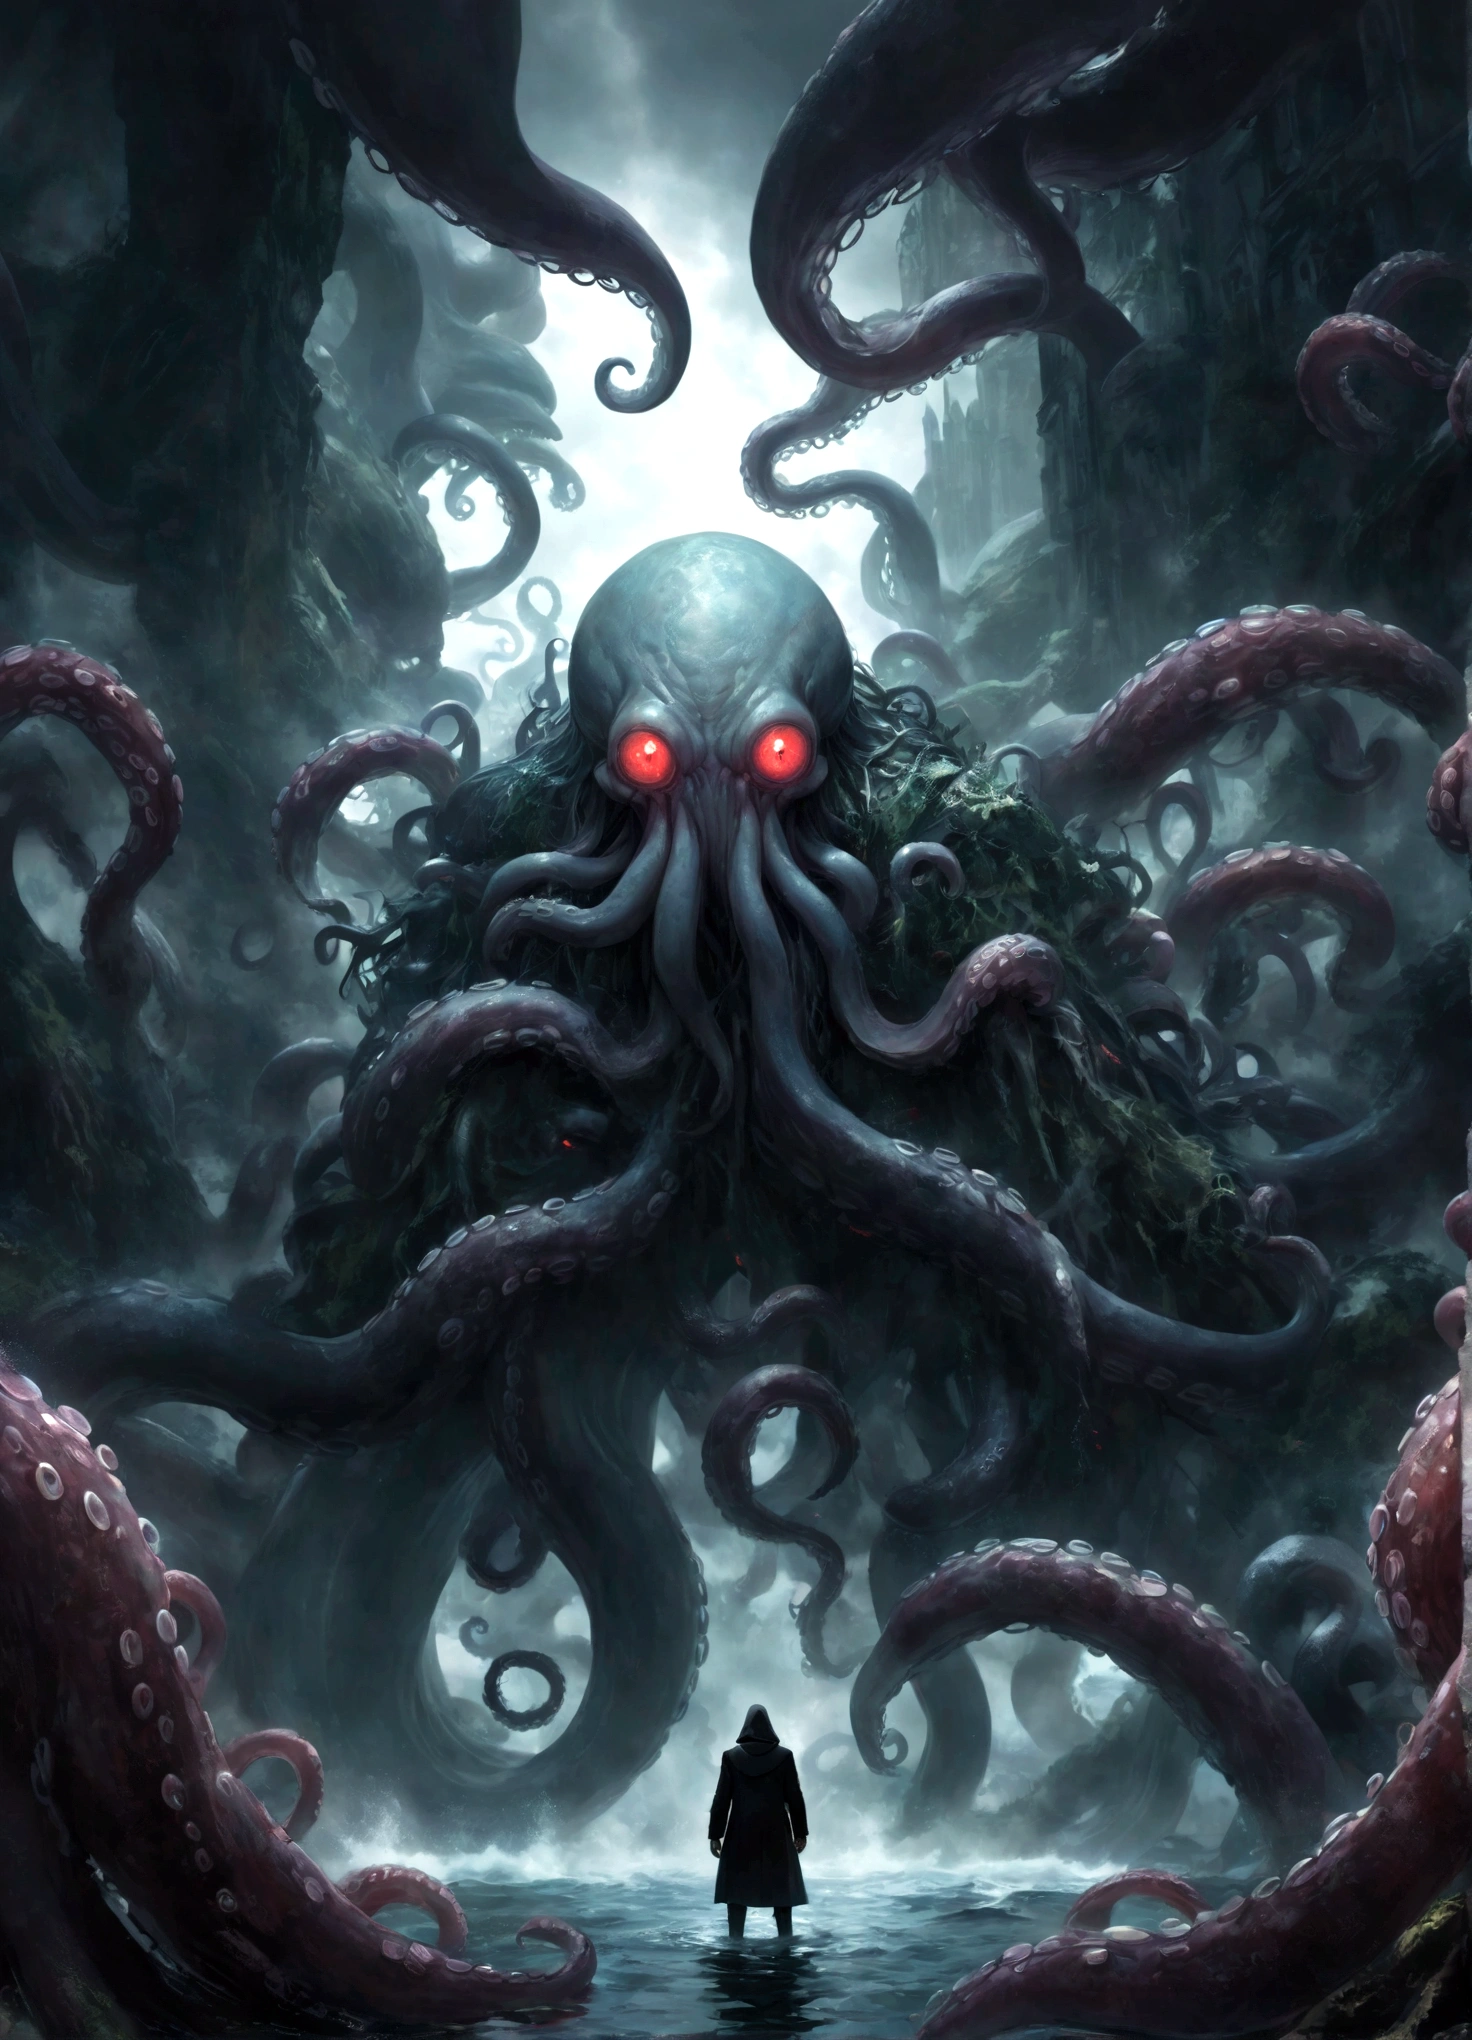 A dark fantasy scene depicting the terrifying creature Cthulhu,emerging from the abyss. The monstrous figure,shrouded in shadows,has large,((menacing tentacles reaching out toward the viewer:1.3)),The atmosphere is eerie and foreboding,with a stormy,nightmarish sky filled with swirling dark clouds. The sea below is turbulent and foamy,reflecting the chaos above. Dim,ghostly lights illuminate parts of Cthulhu’s form,enhancing the horror. The viewer feels an intense sense of dread as the tentacles draw nearer,creating a gripping,immersive experience.,(masterpiece:1.3),(highest quality:1.4),(ultra detailed:1.5),High resolution,extremely detailed,unity 8k wallpaper,(Draws a dark and decadent background,Expresses the fear that the viewer feels,collapses the bottom of the image,Please express it artistically by blurring it in some places.),dynamically,Presence,fear,despair,dark fantasy,Nervousness,Light and darkness